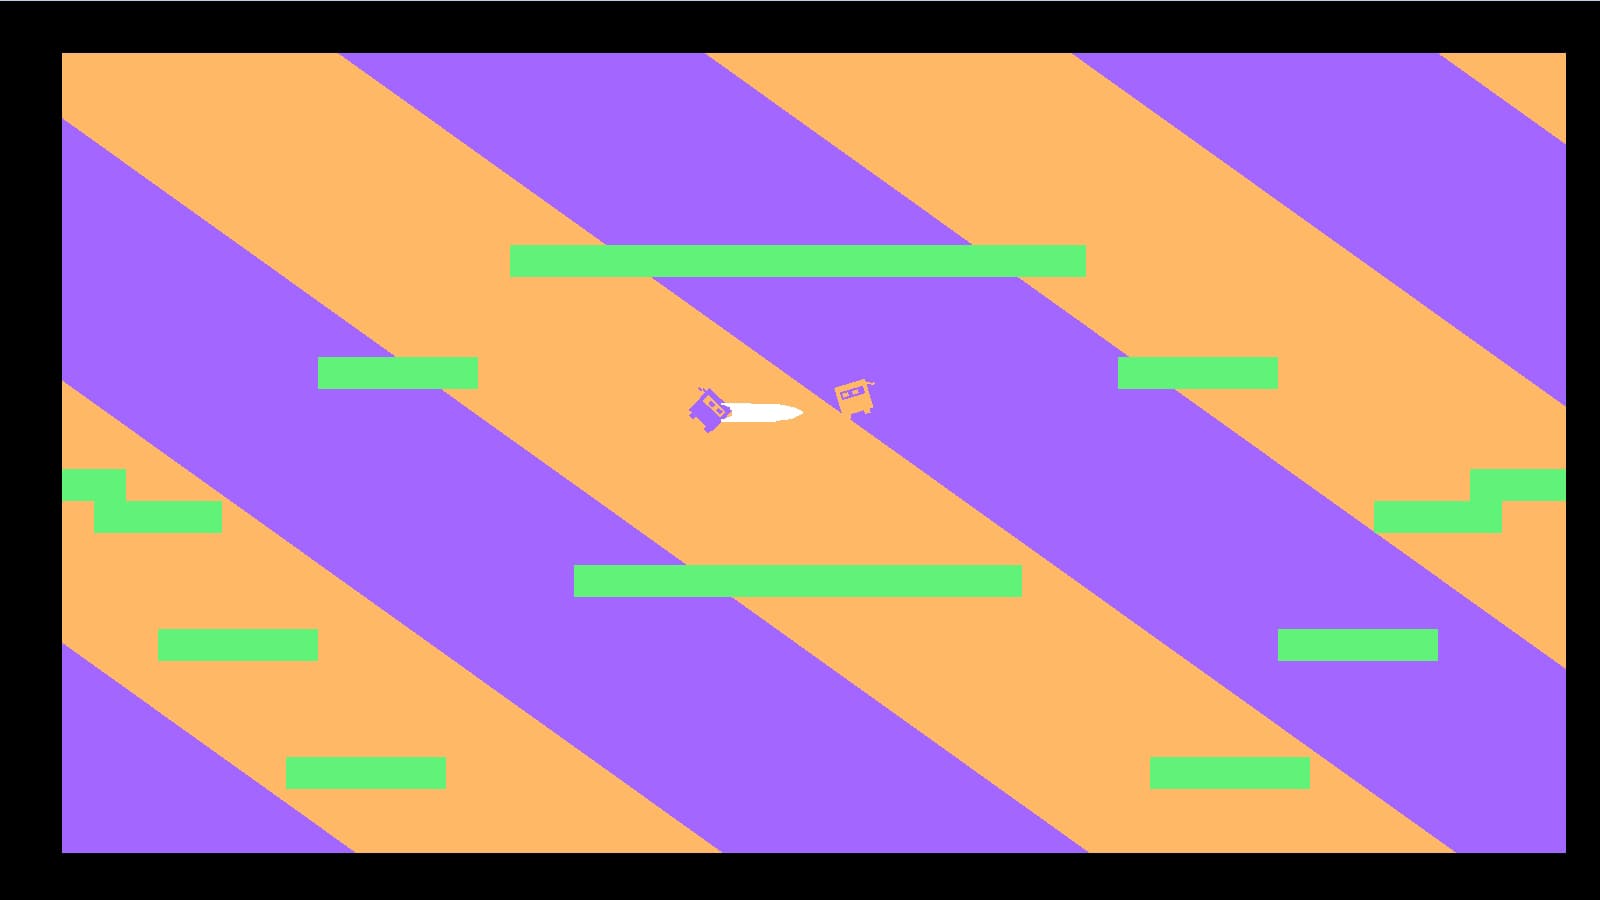 Two square purple and orange ninjas fight each other against a striped purple and orange background. 